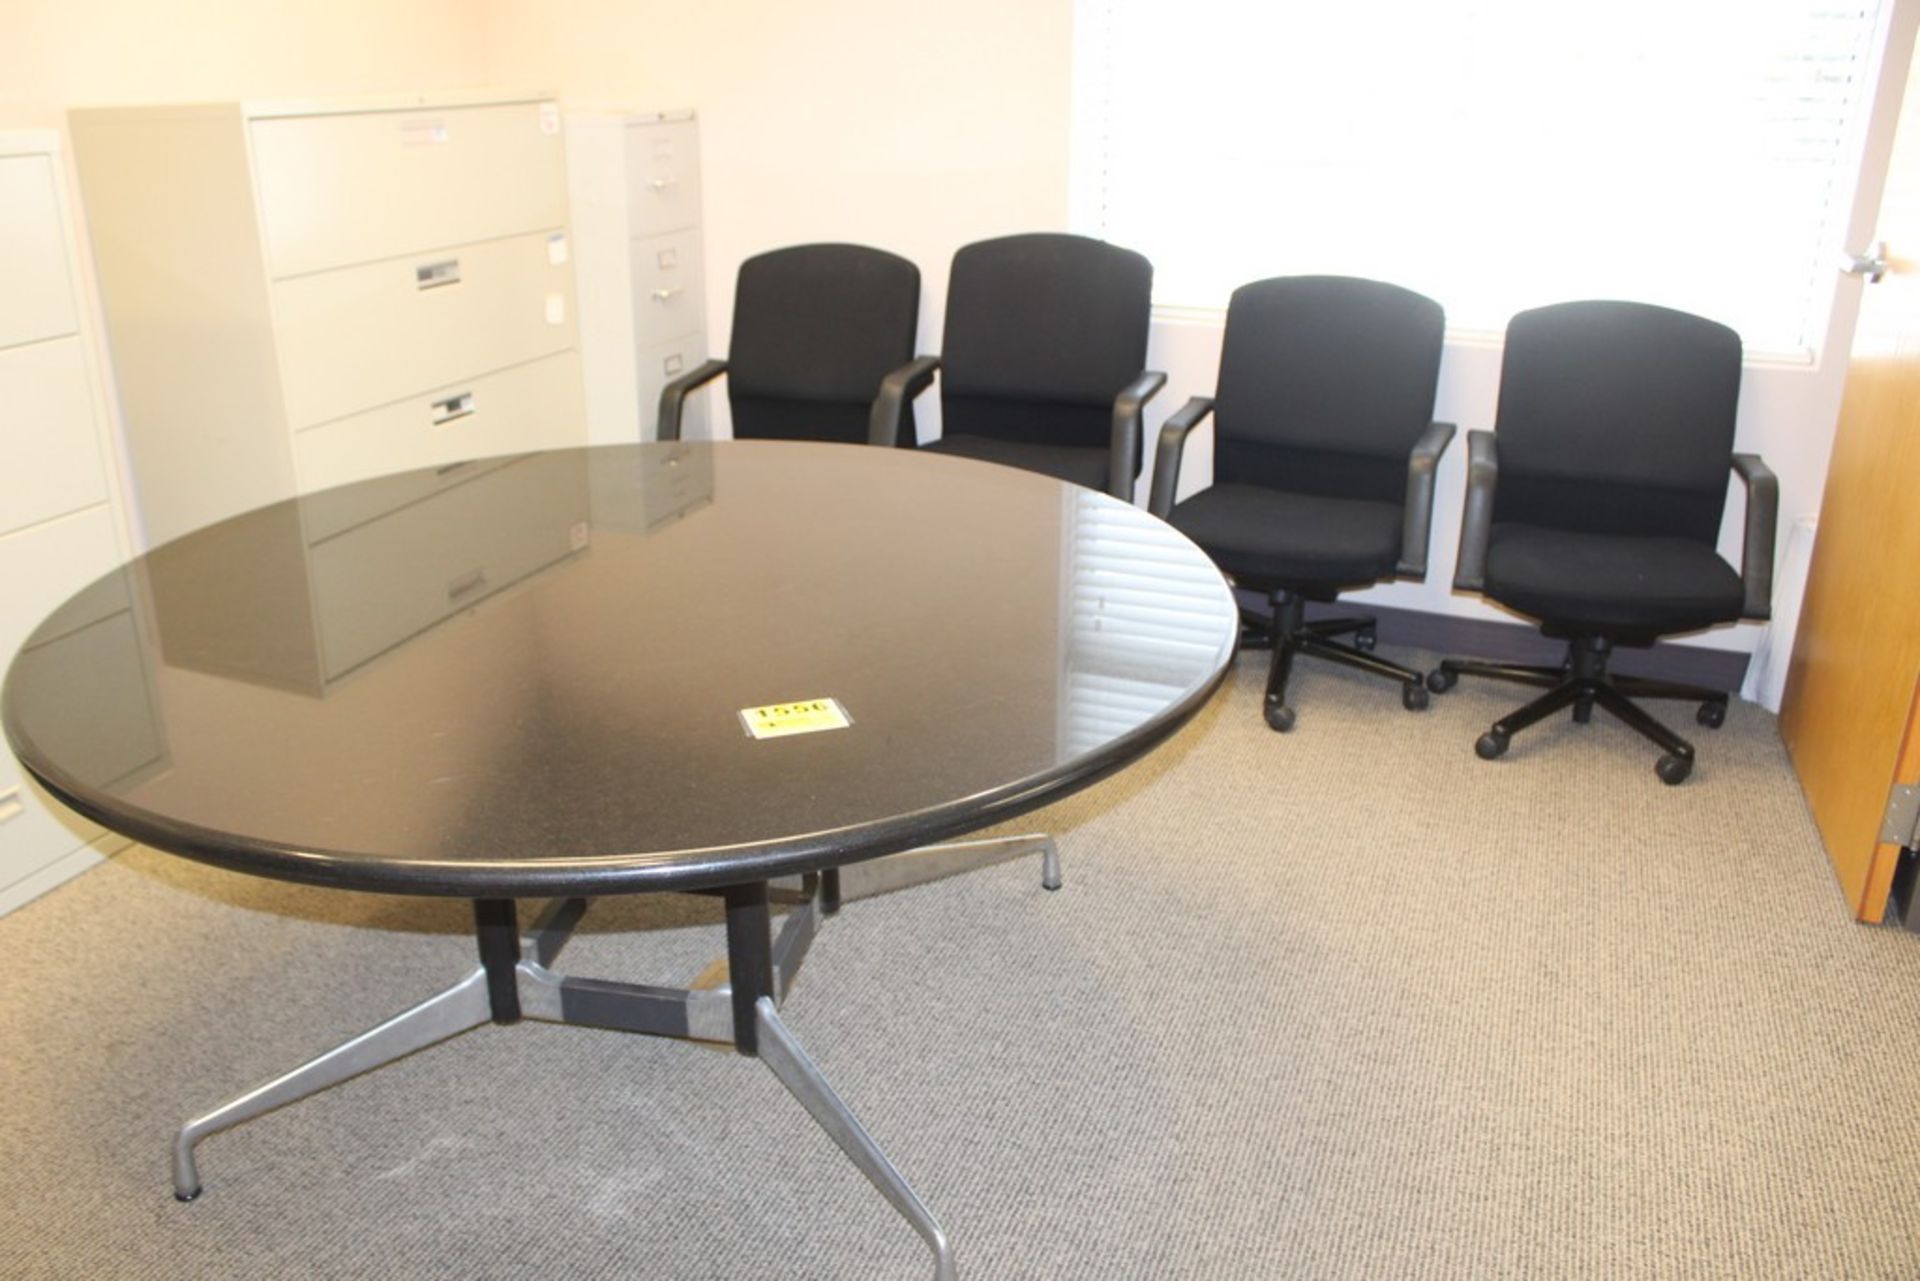 ROUND CONFERENCE TABLE, 66", WITH (4) CLOTH ARMCHAIRS WITH CASTERS